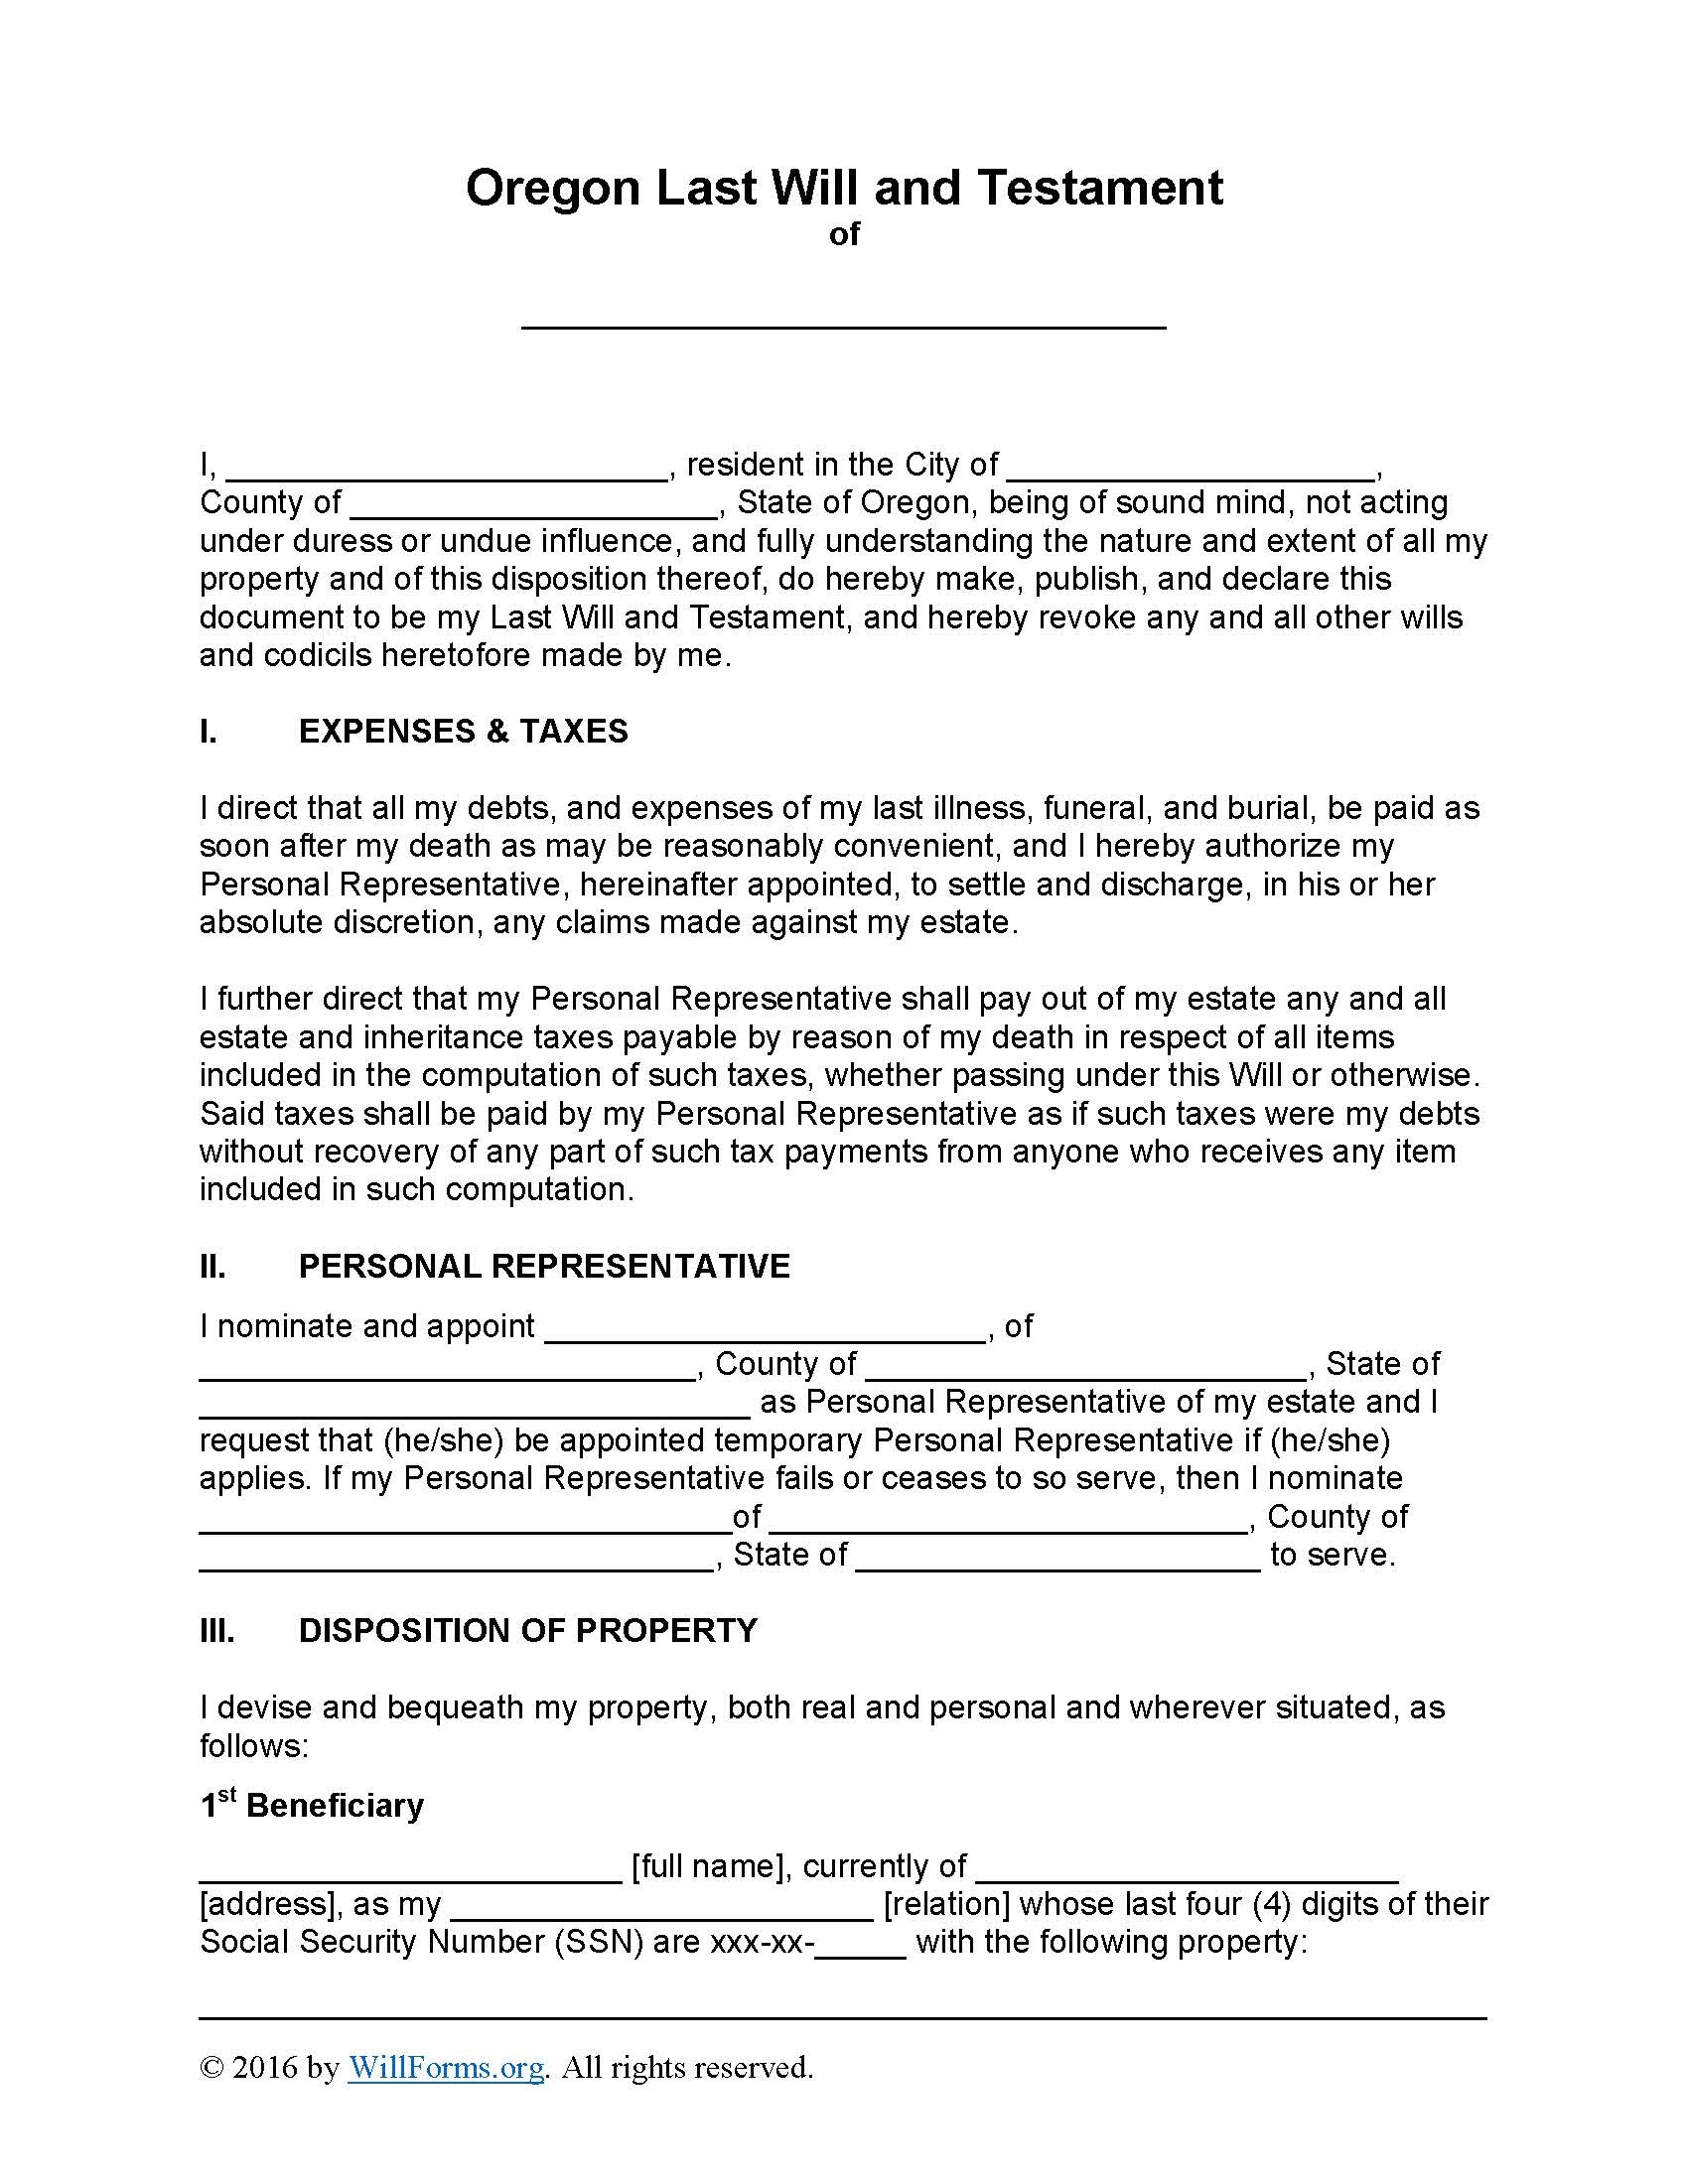 Oregon Last Will And Testament Form - Will Forms : Will Forms - Free Printable Florida Last Will And Testament Form